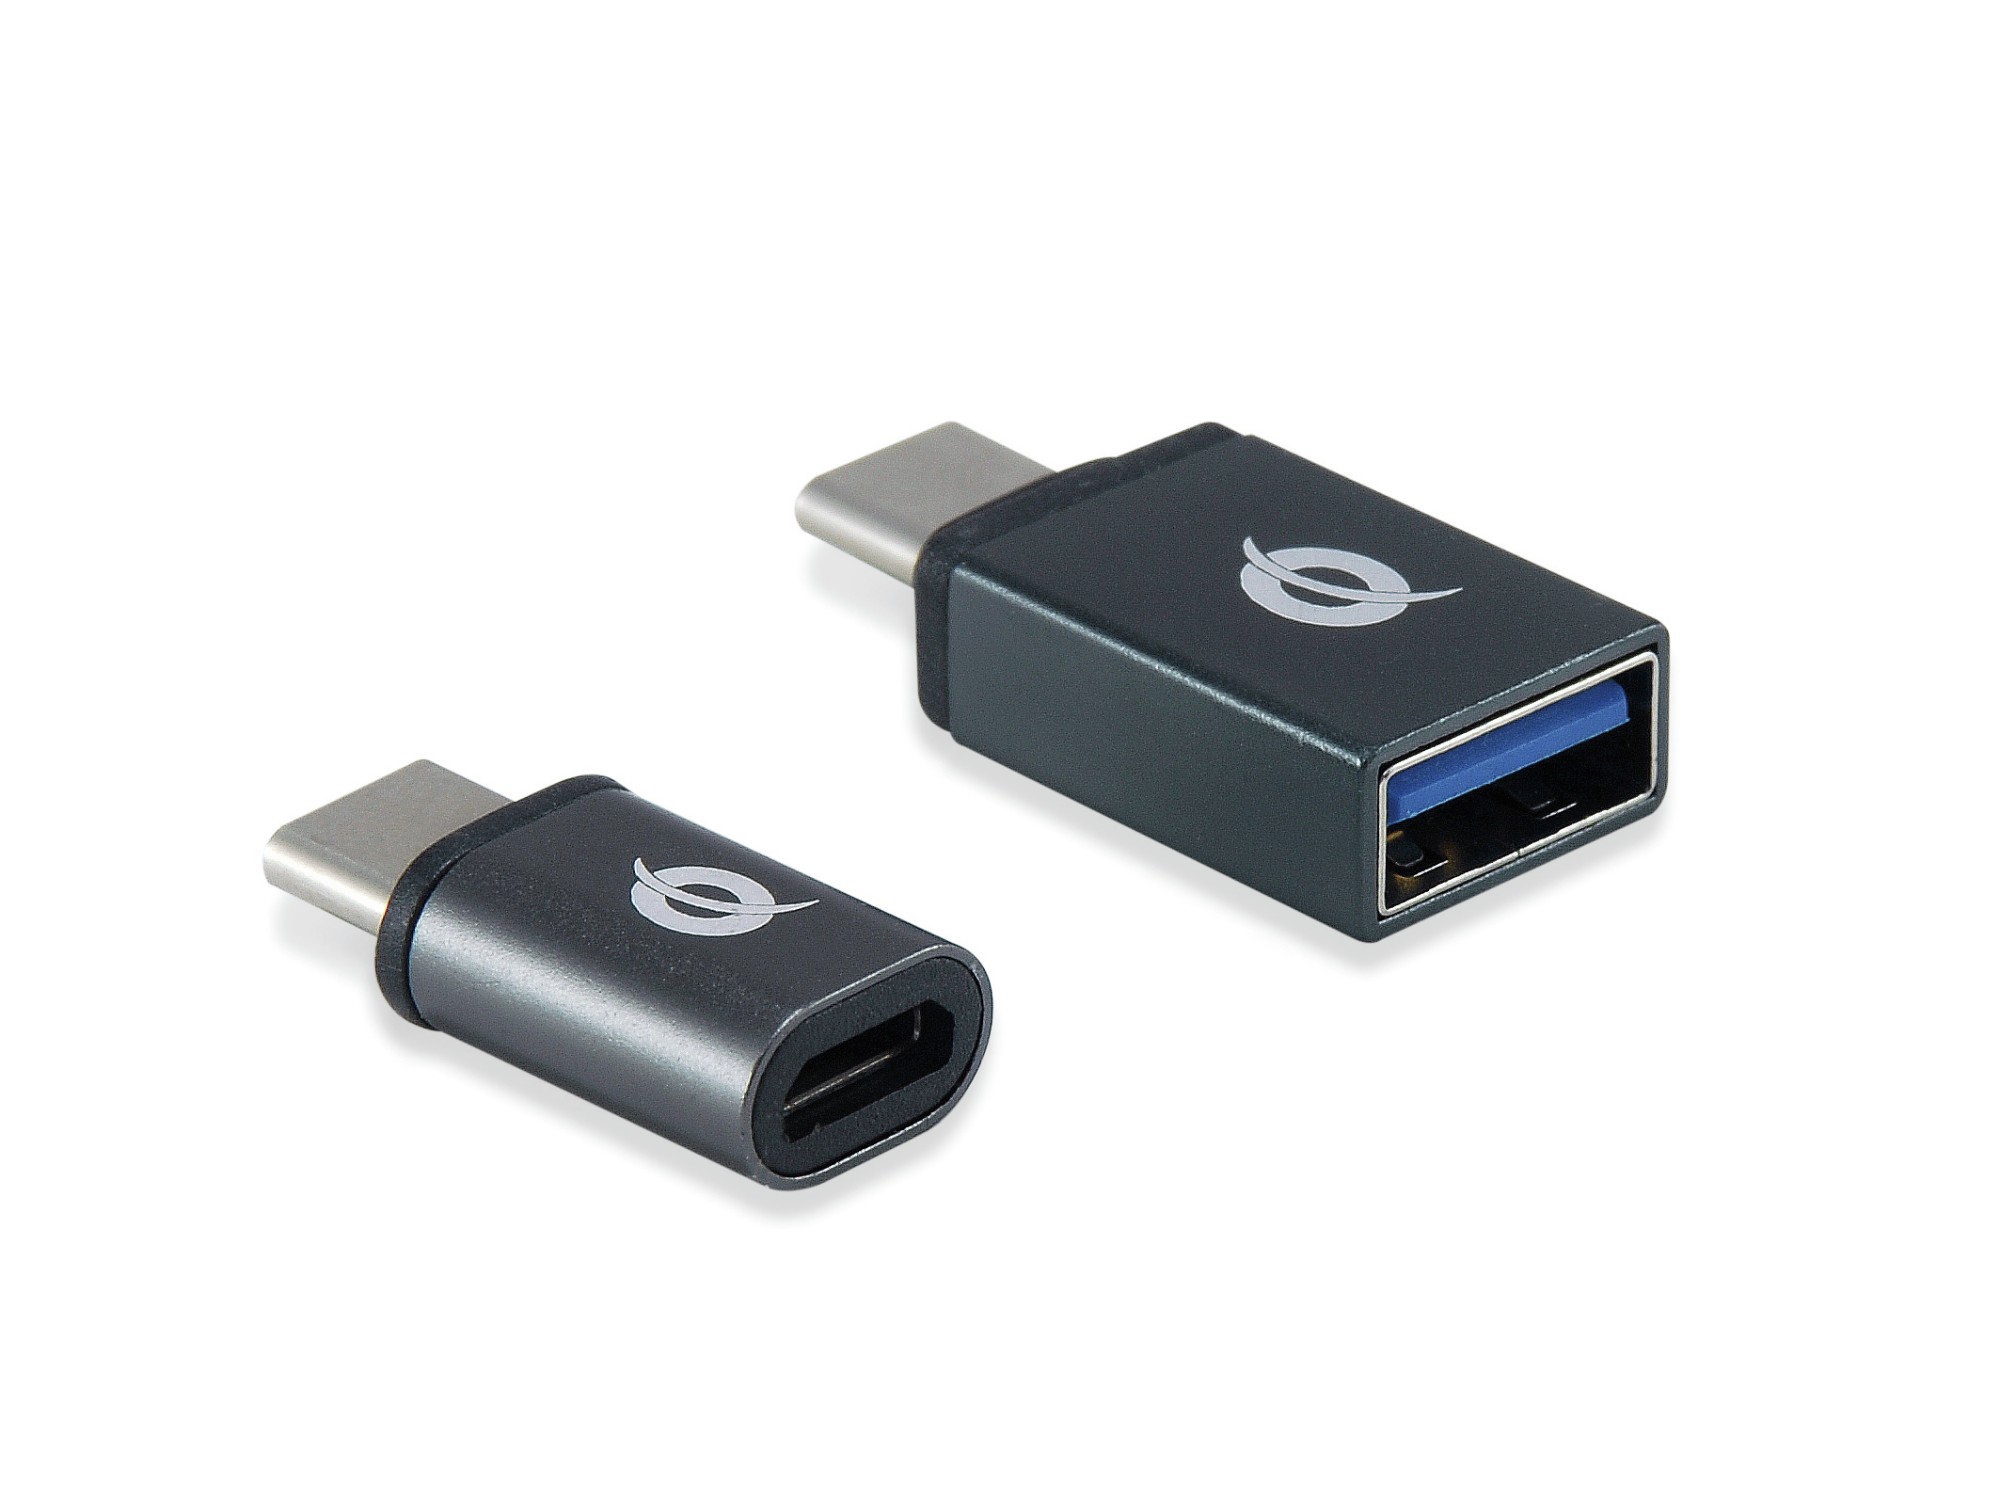 Photos - Cable (video, audio, USB) Conceptronic DONN04G USB-C to USB A/MicroB OTG Adapter 2-Pack, 10Gbps 